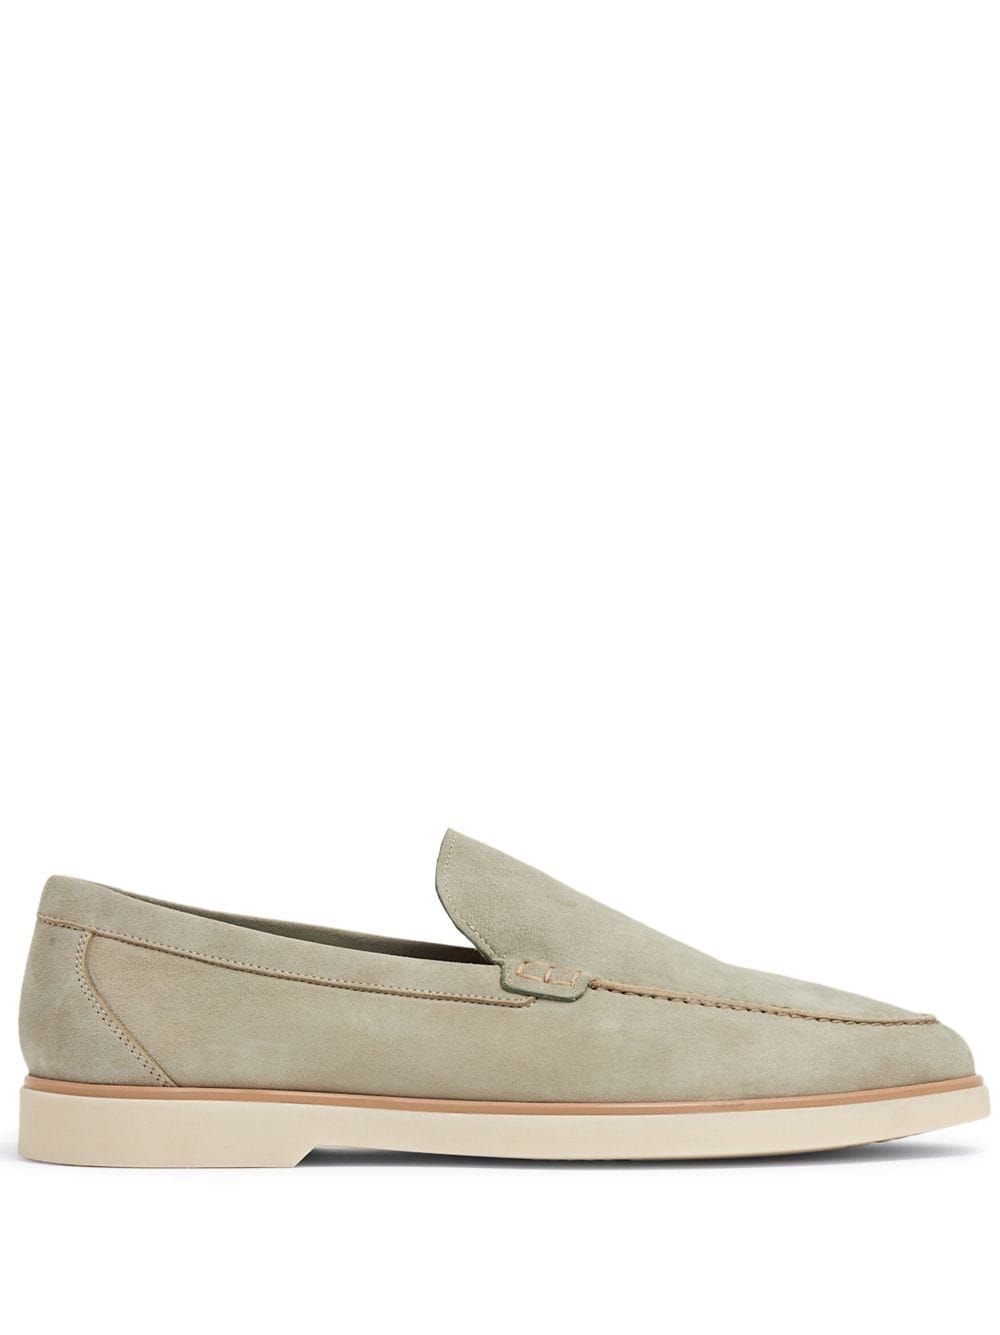 Magnanni Mens Pale Green Paraiso Slip-on Suede Loafers